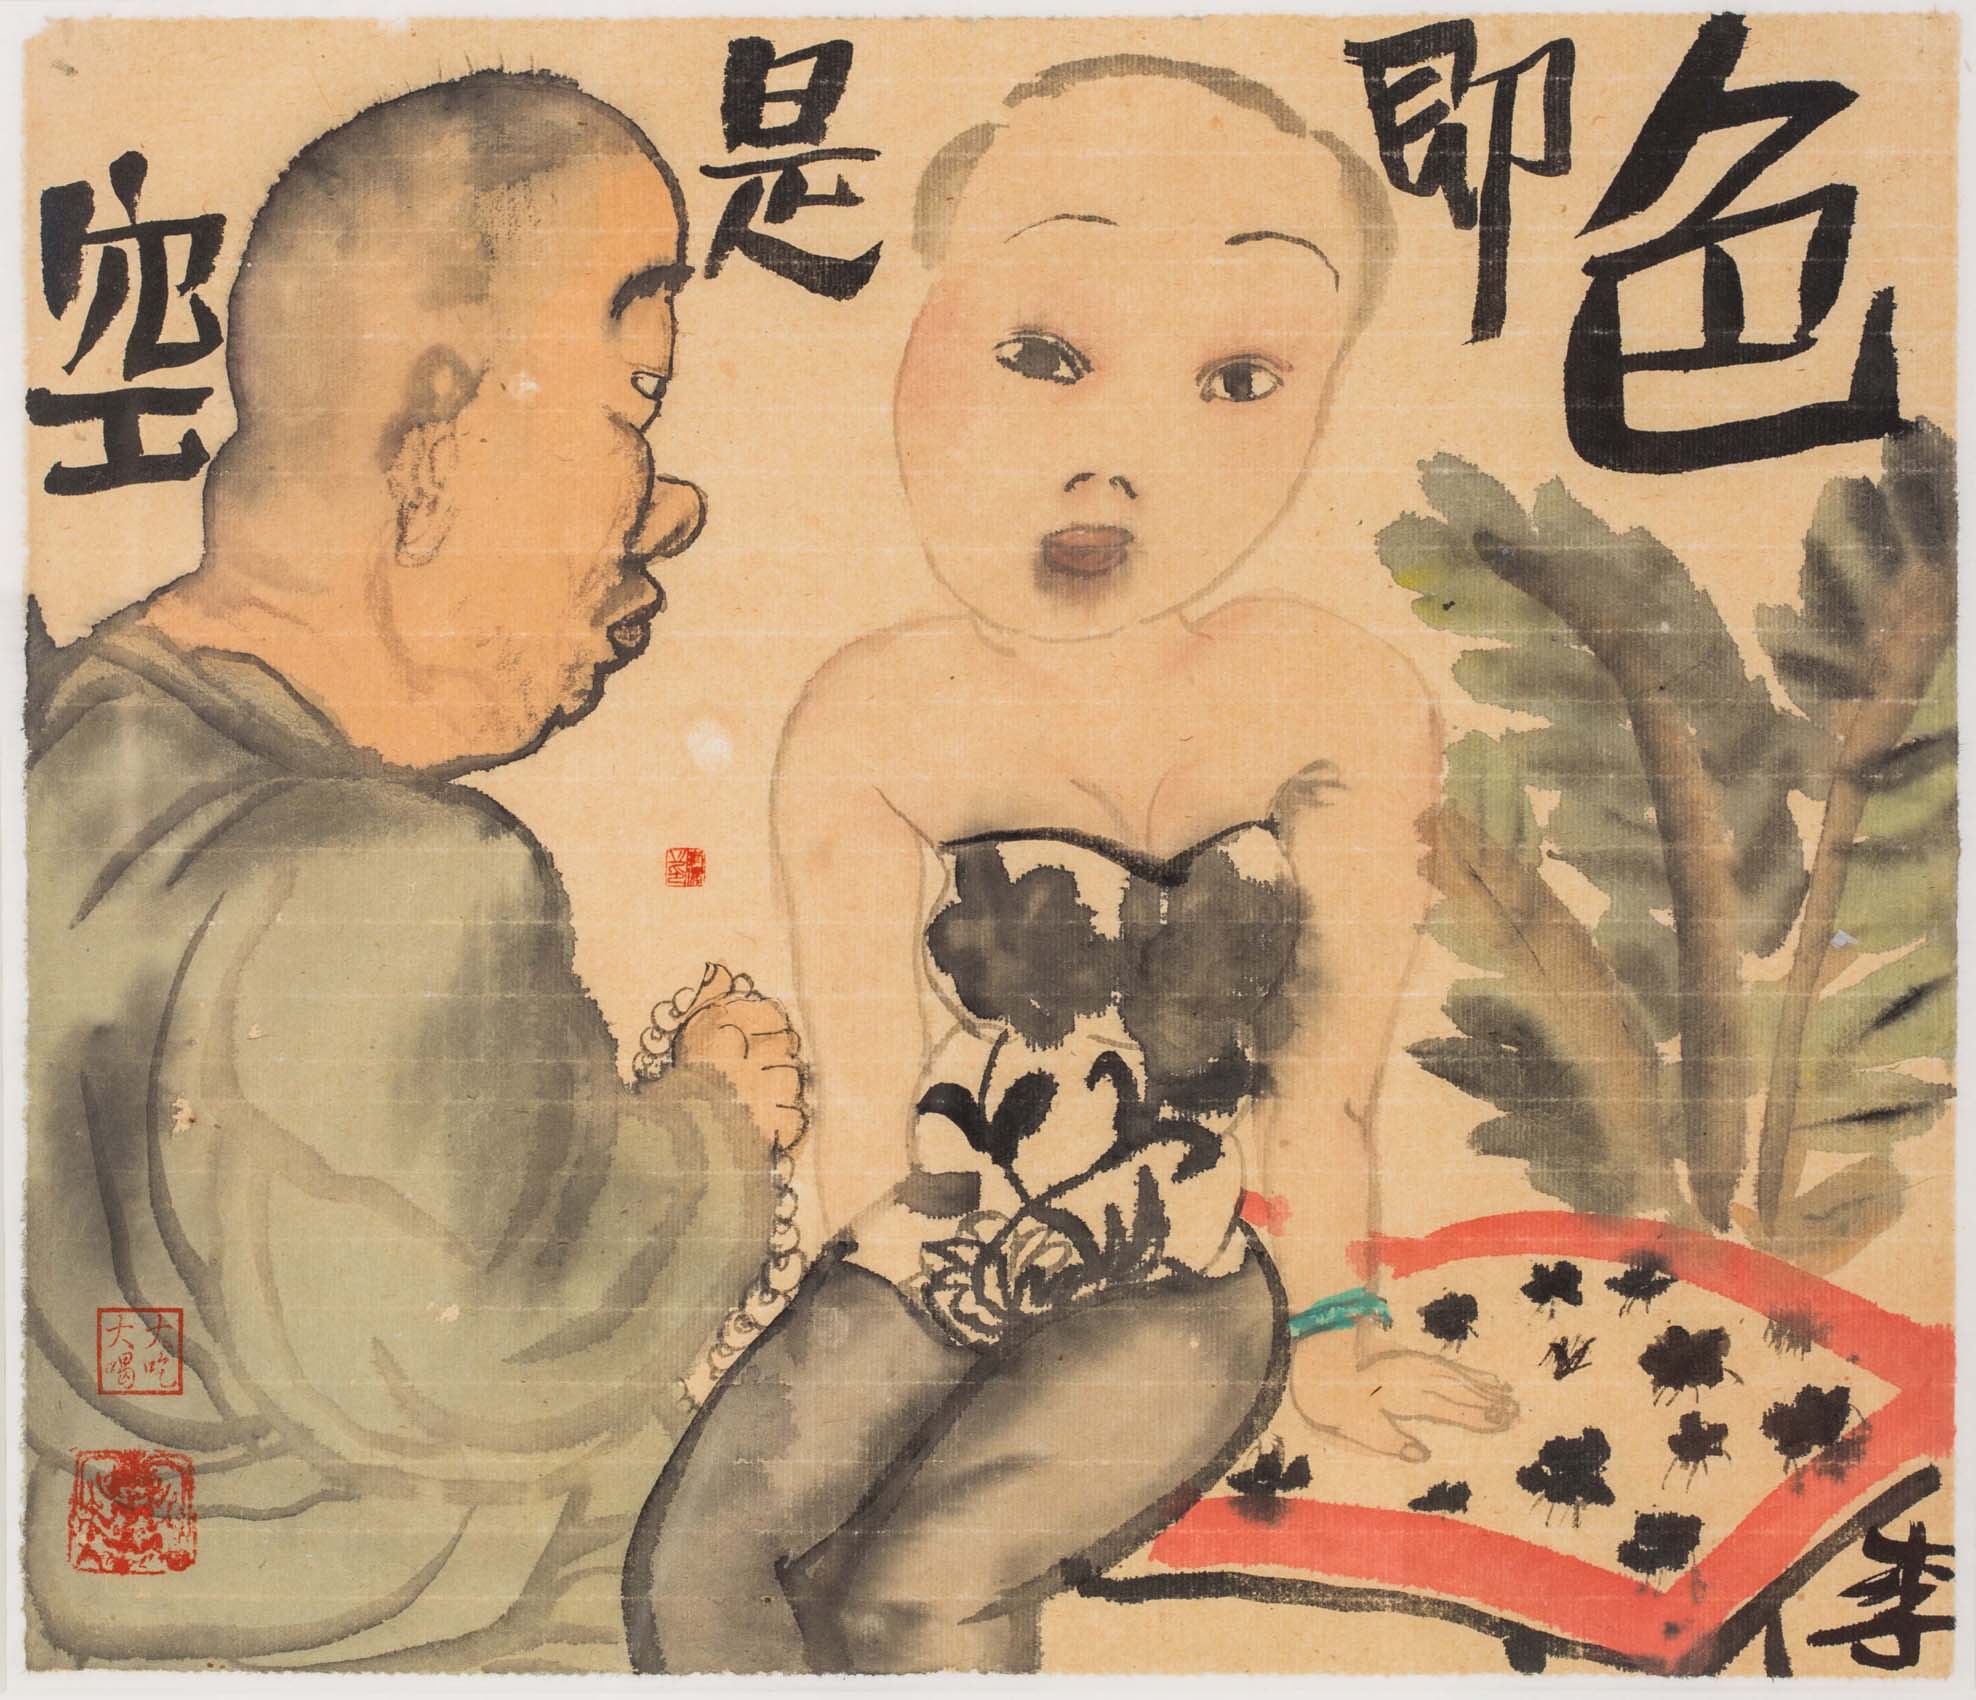 Li Jin, ‘Sex is nothing, nothingness is sex’, 2006, ink and colour on xuan paper. La Trobe University, Geoff Raby Collection of Chinese Art. Donated by Dr Geoff Raby AO through the Australian Government’s Cultural Gifts Program, 2019. © Li Jin. Photo: Jia De